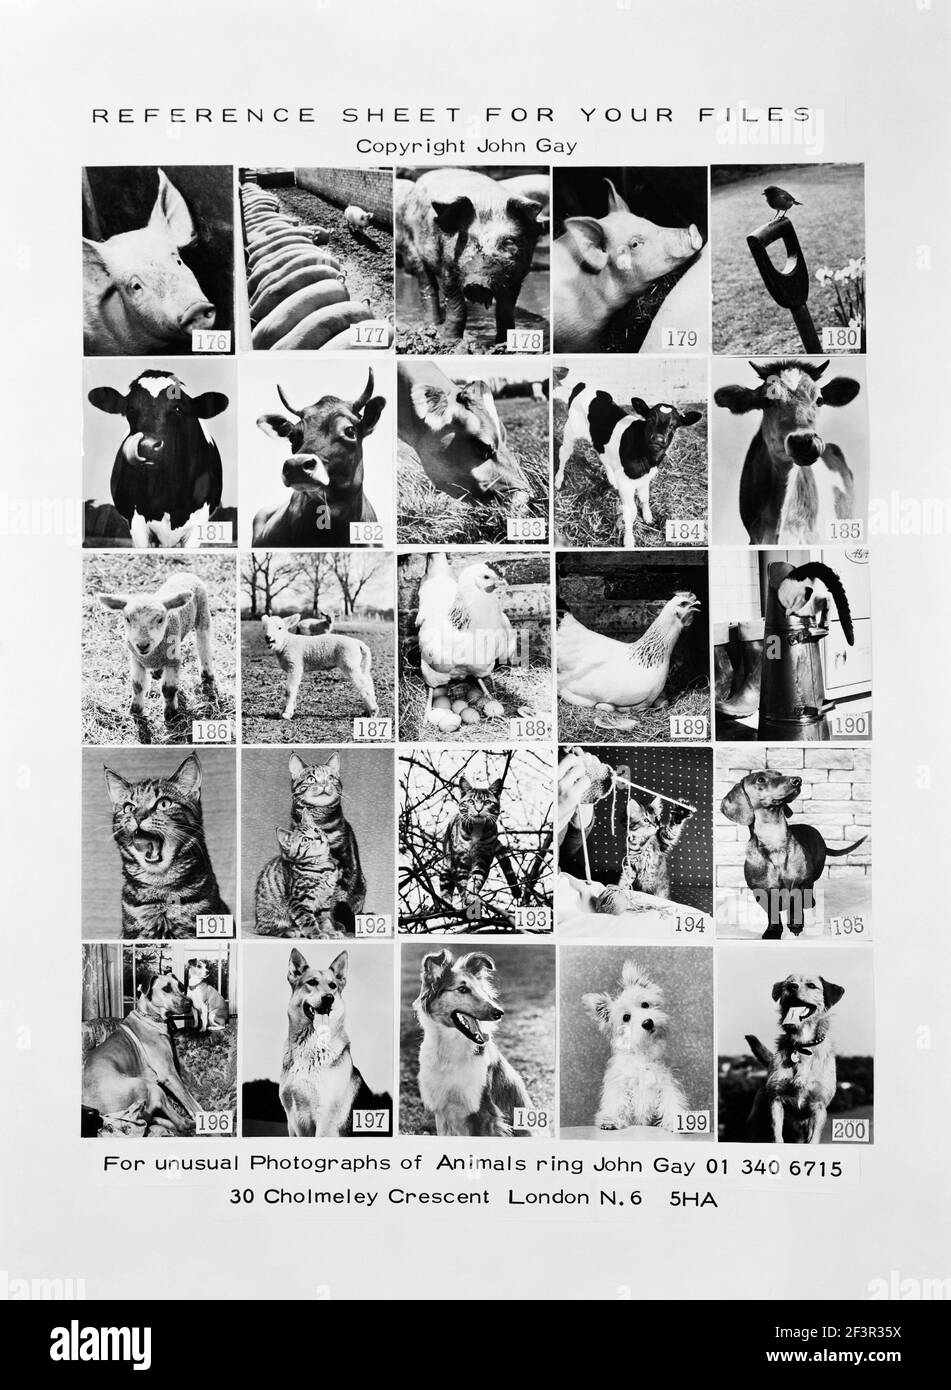 Photograph of promotional reference sheet of unusual photographs of animals taken by John Gay. November 1970. pig, cattle, lamb, chicken, calf, cow Stock Photo